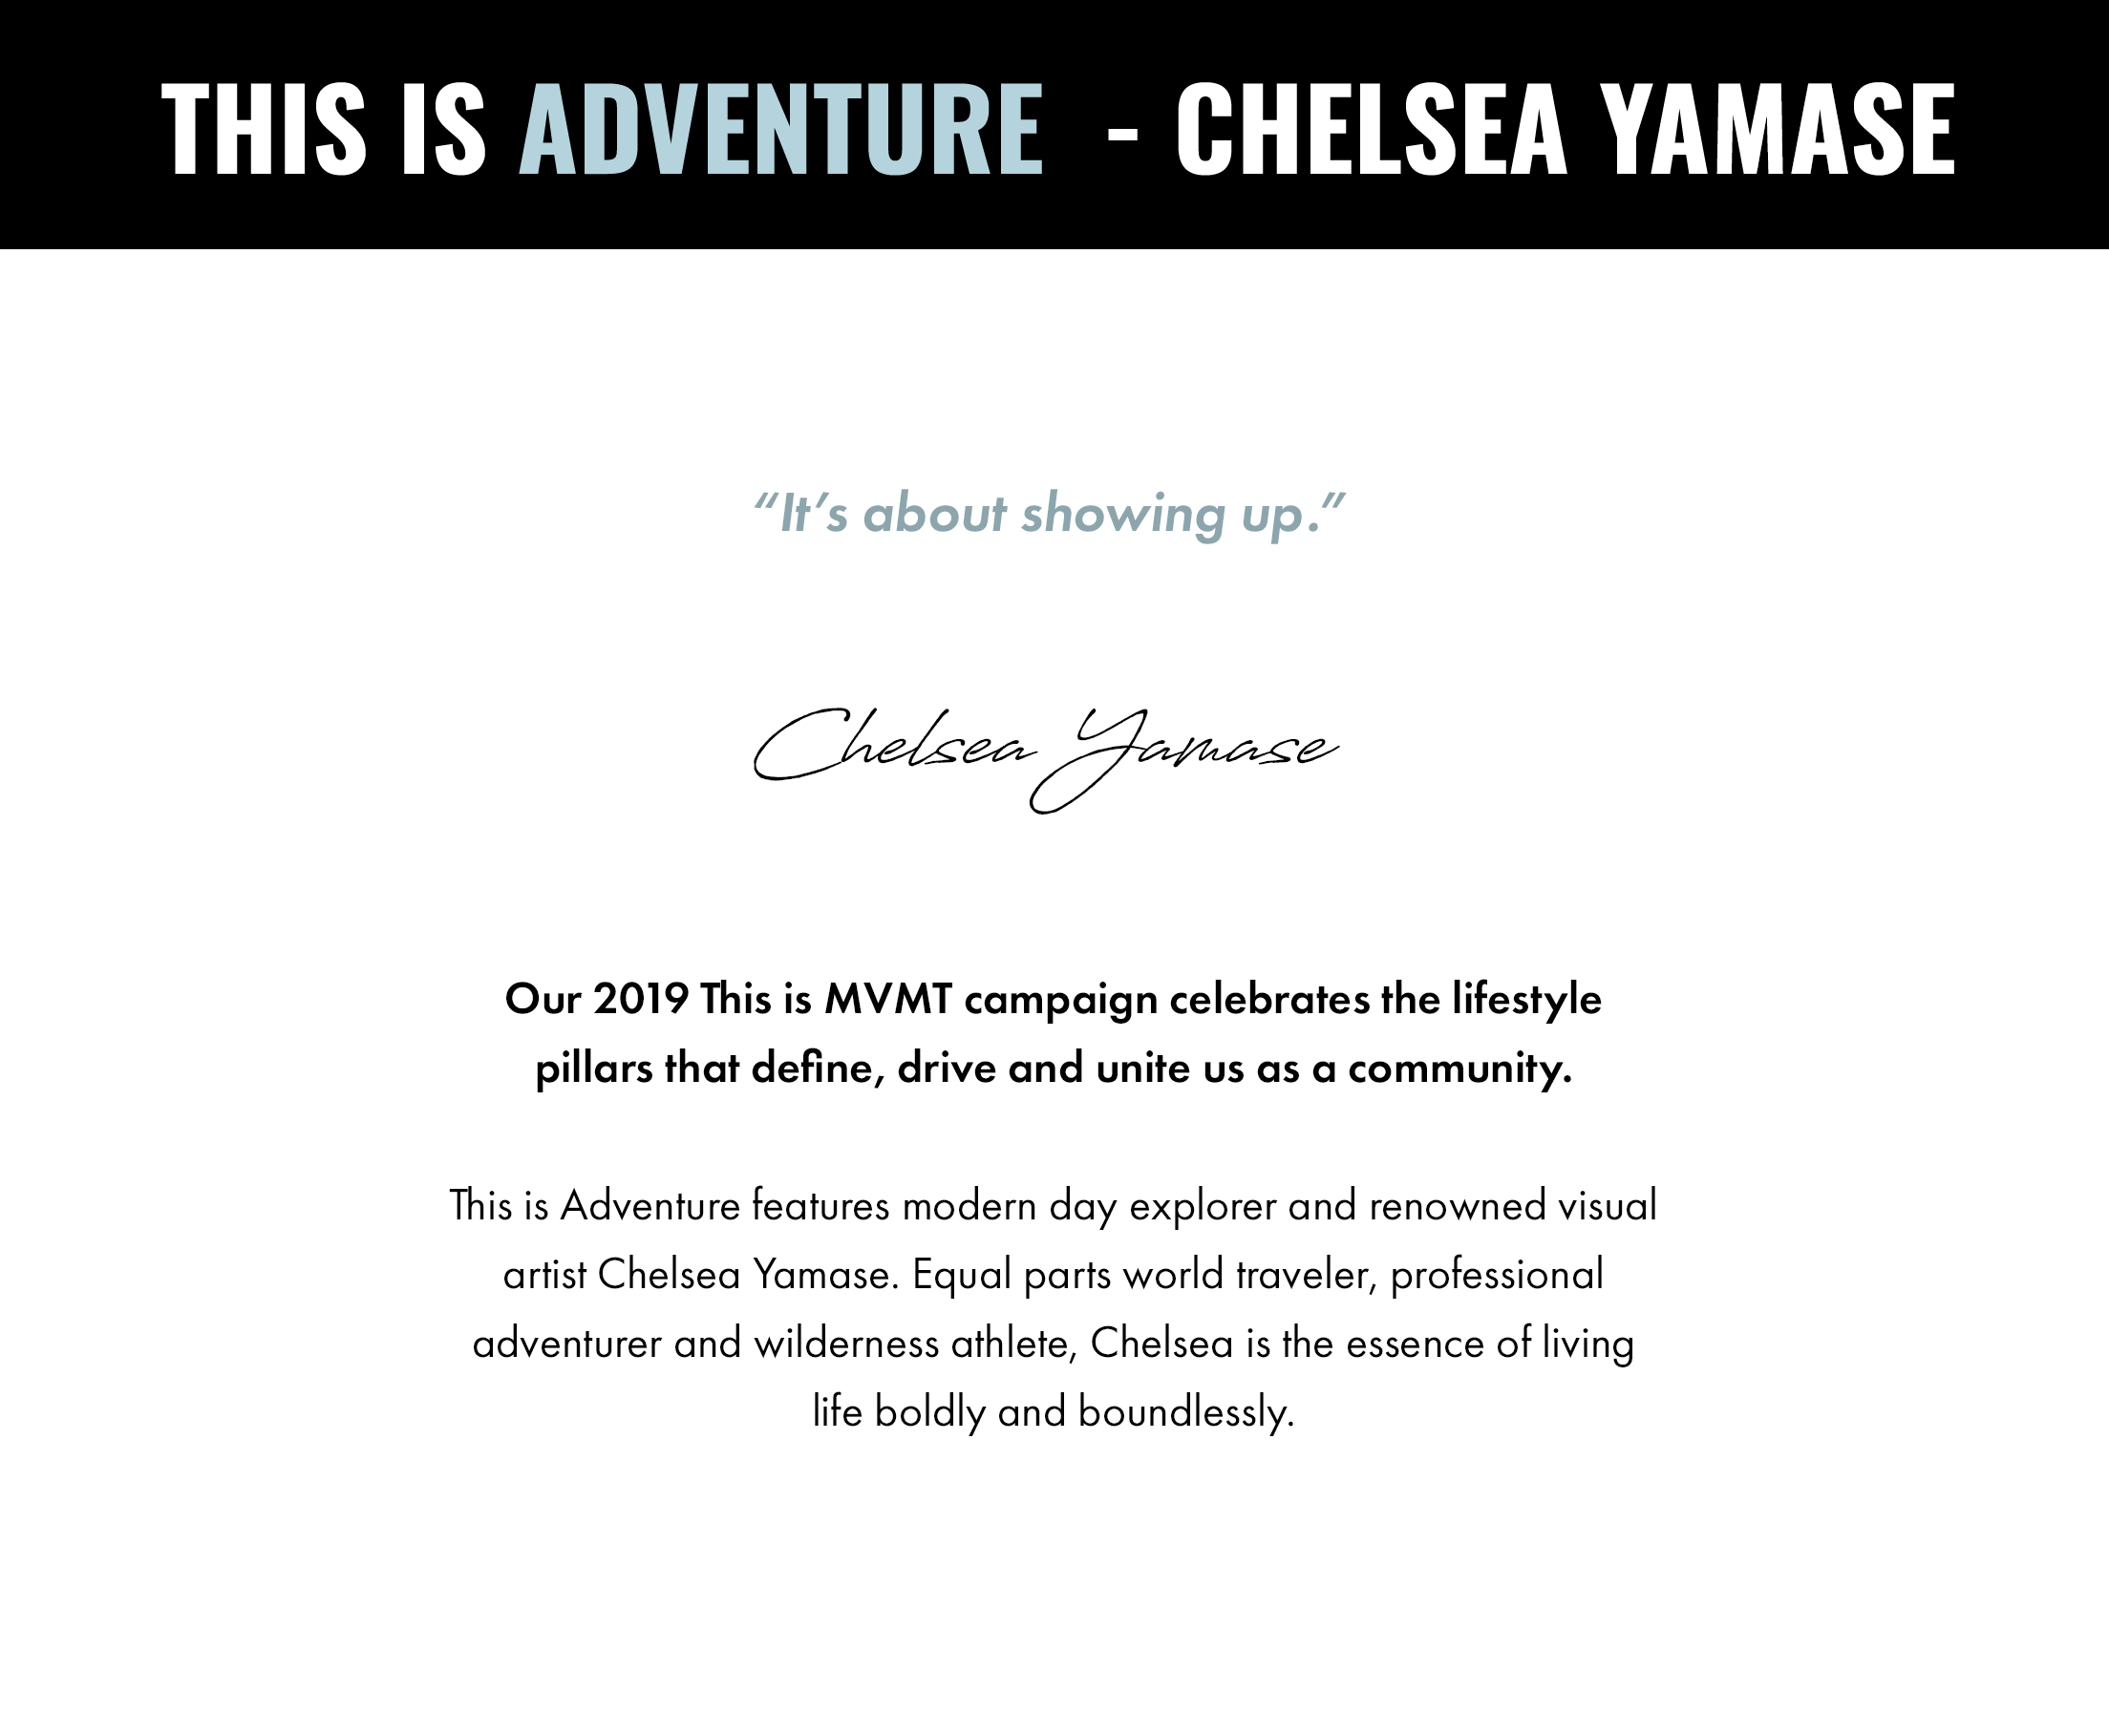 This is adventure - Chelsea Yamase. "It's about showing up." -Chelsea Yamase. Our 2019 This is MVMT campaign celebrates the lifestyle pillars that define, drive and unite us as a community. This is Adventure features modern day explorer and renowned visual artist Chelsea Yamase. Equal parts world traveler, professional adventurer and wilderness athlete, Chelsea is the essence of living life boldly and boundlessly.